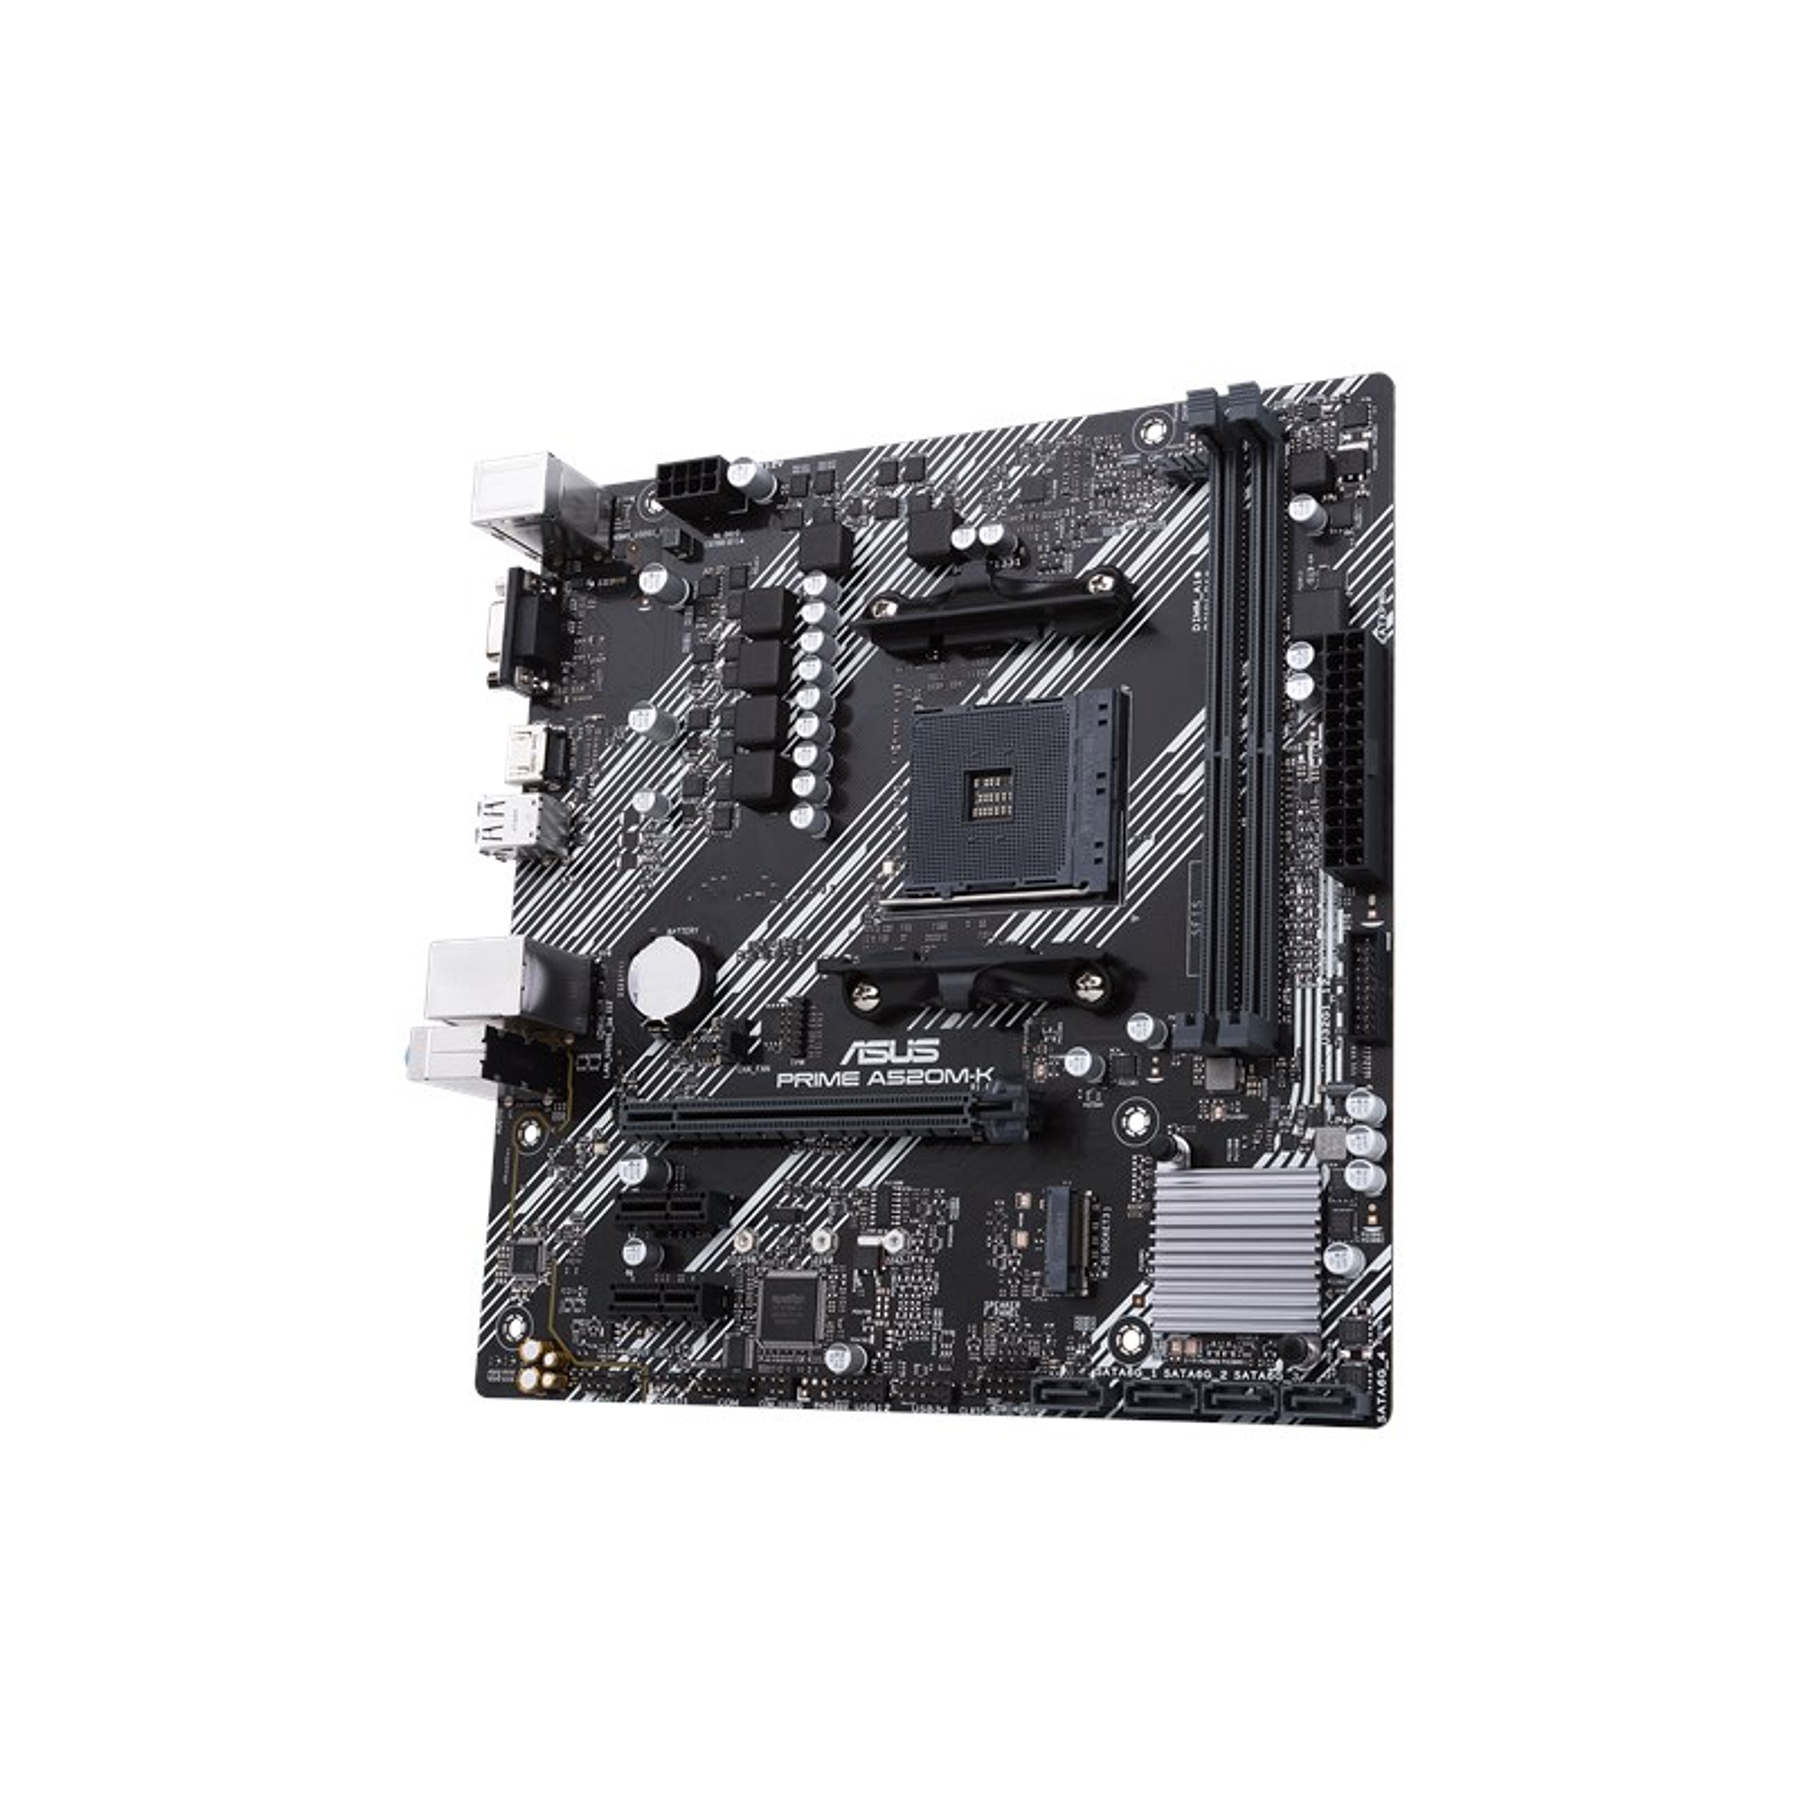 ASUS PRIME A520M-K Placa Madre micro ATX AMD A520 Chipset